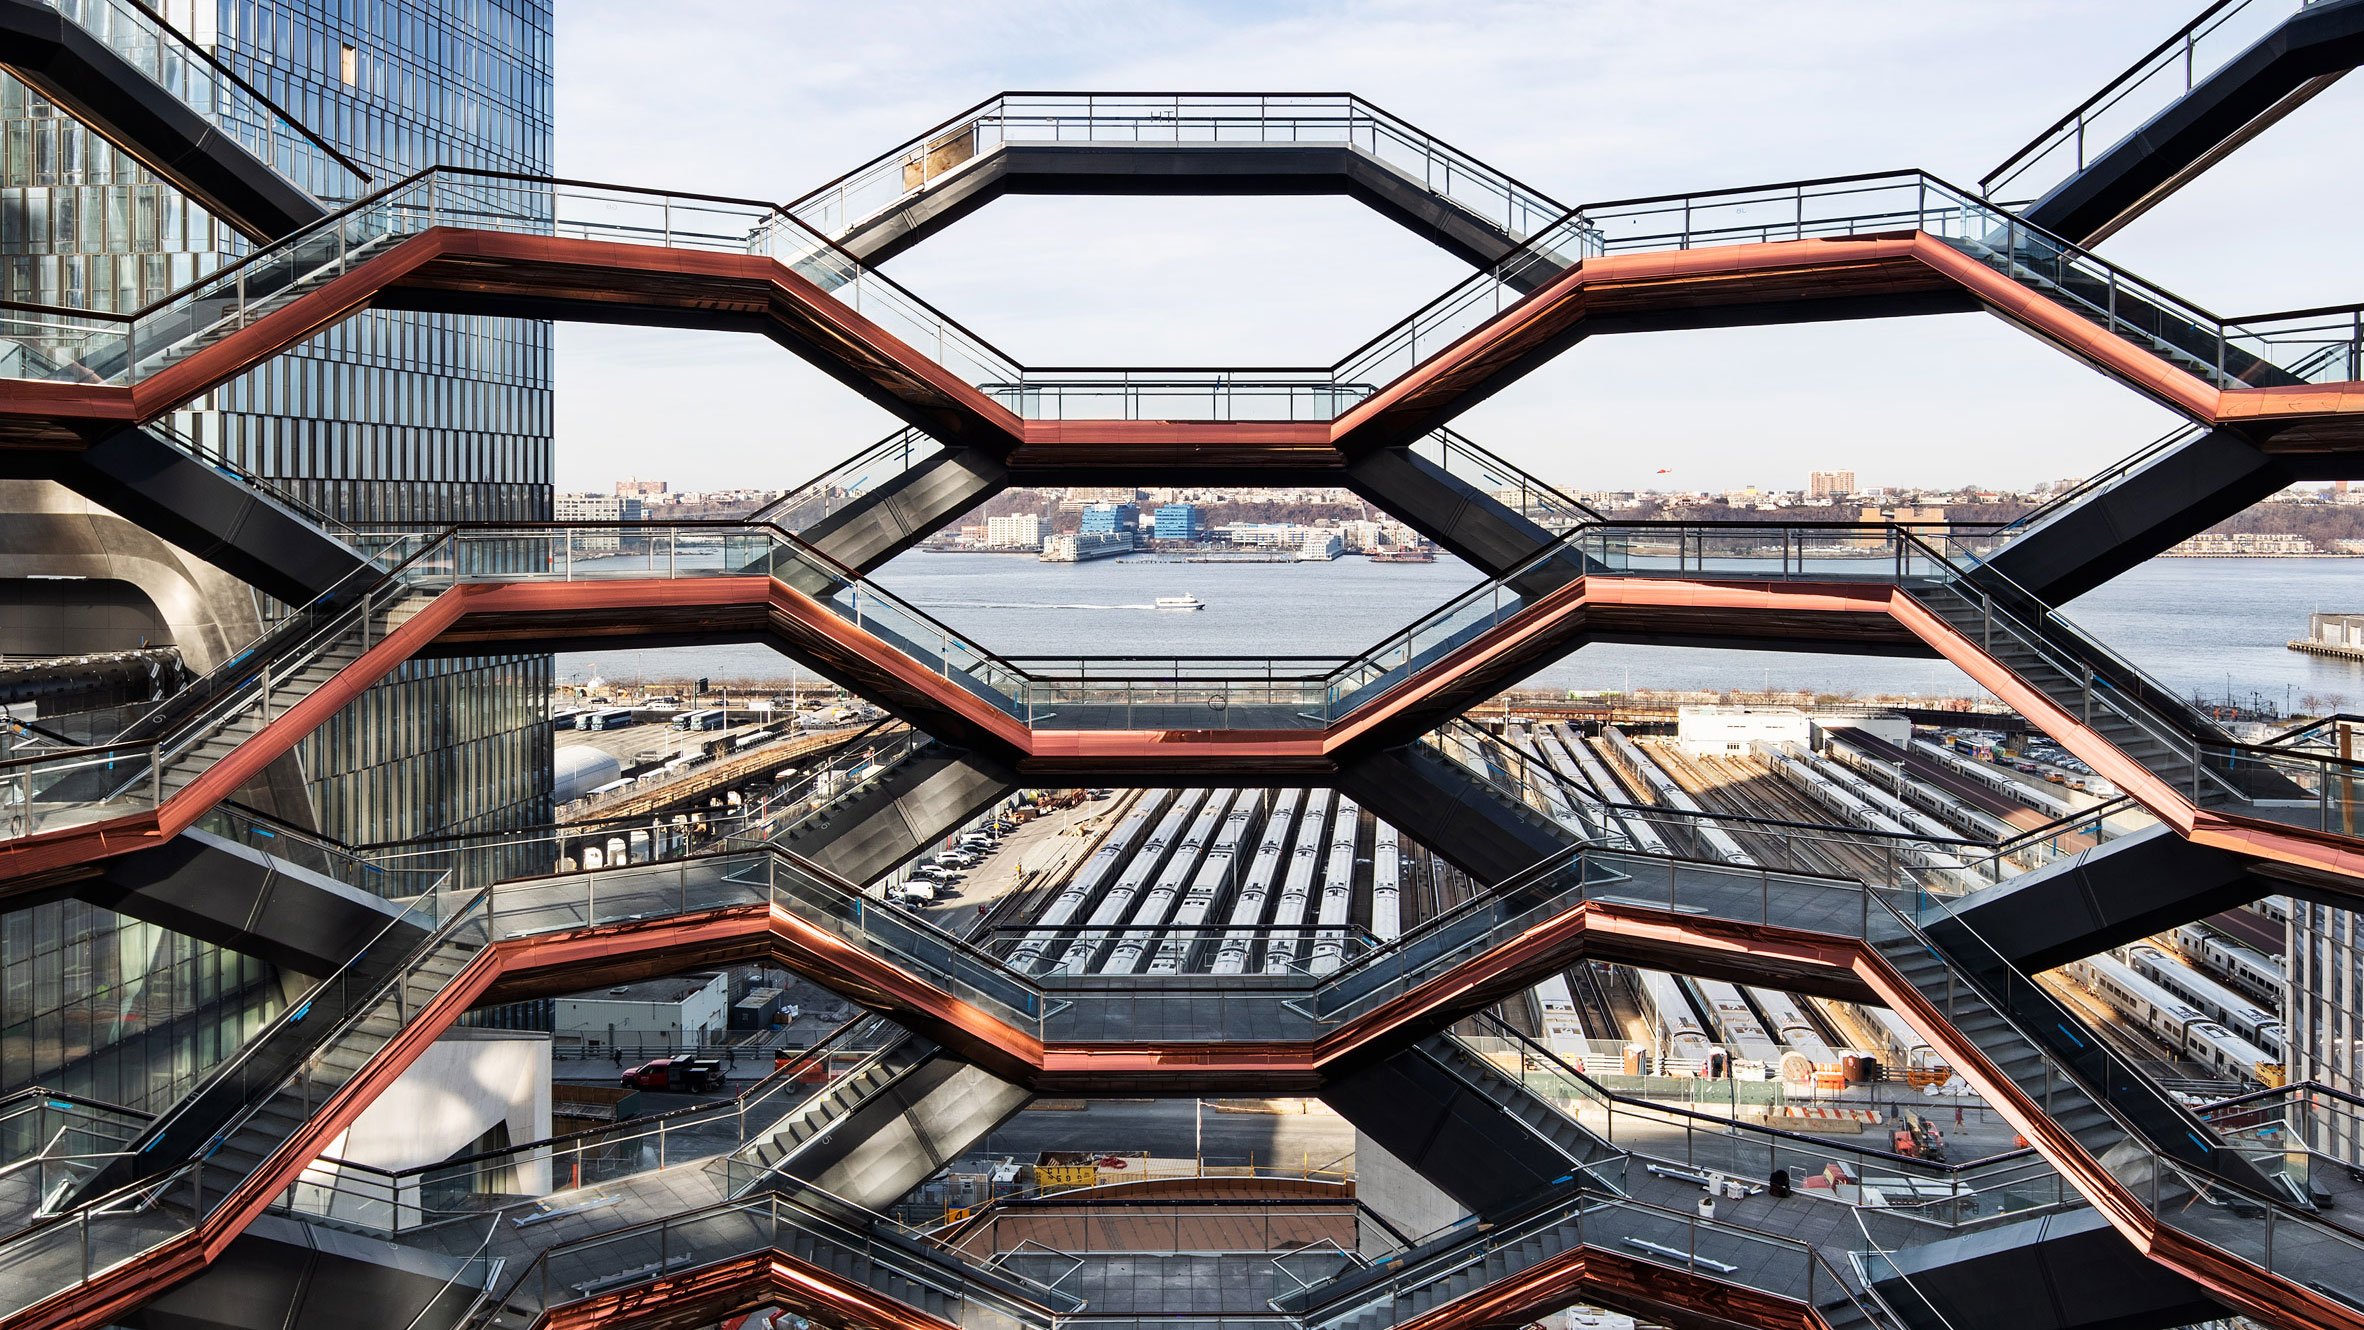 Heatherwick S Vessel At Hudson Yards Claims Ownership Of Visitor Photos